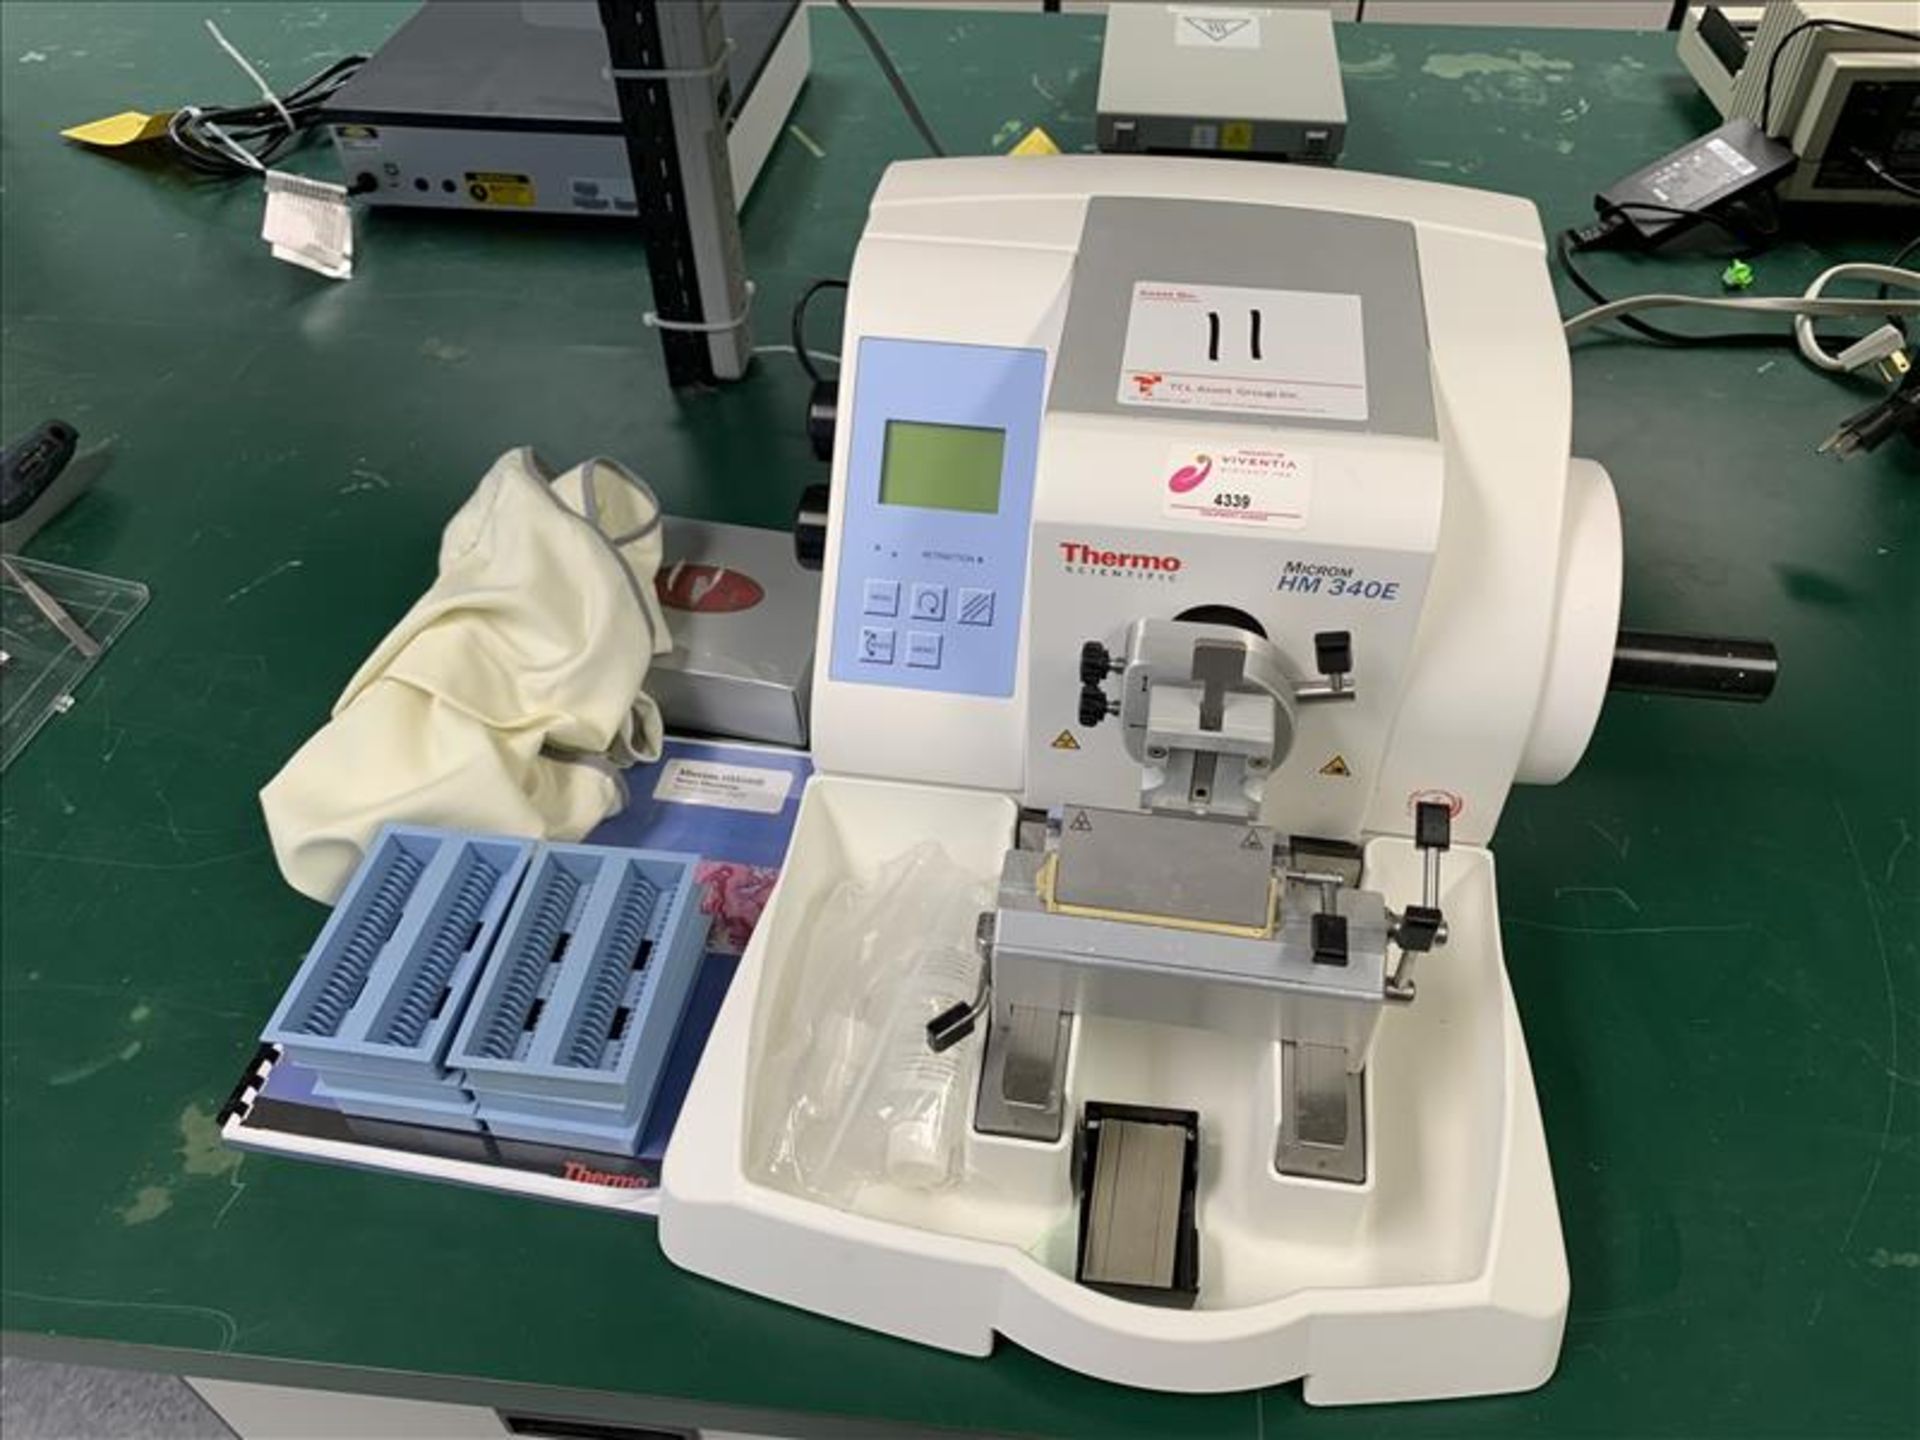 Thermo Scientific Microtome, CLS-DT315X Disposable Microtome Knife, mod. HM 340 E S/N S14110877